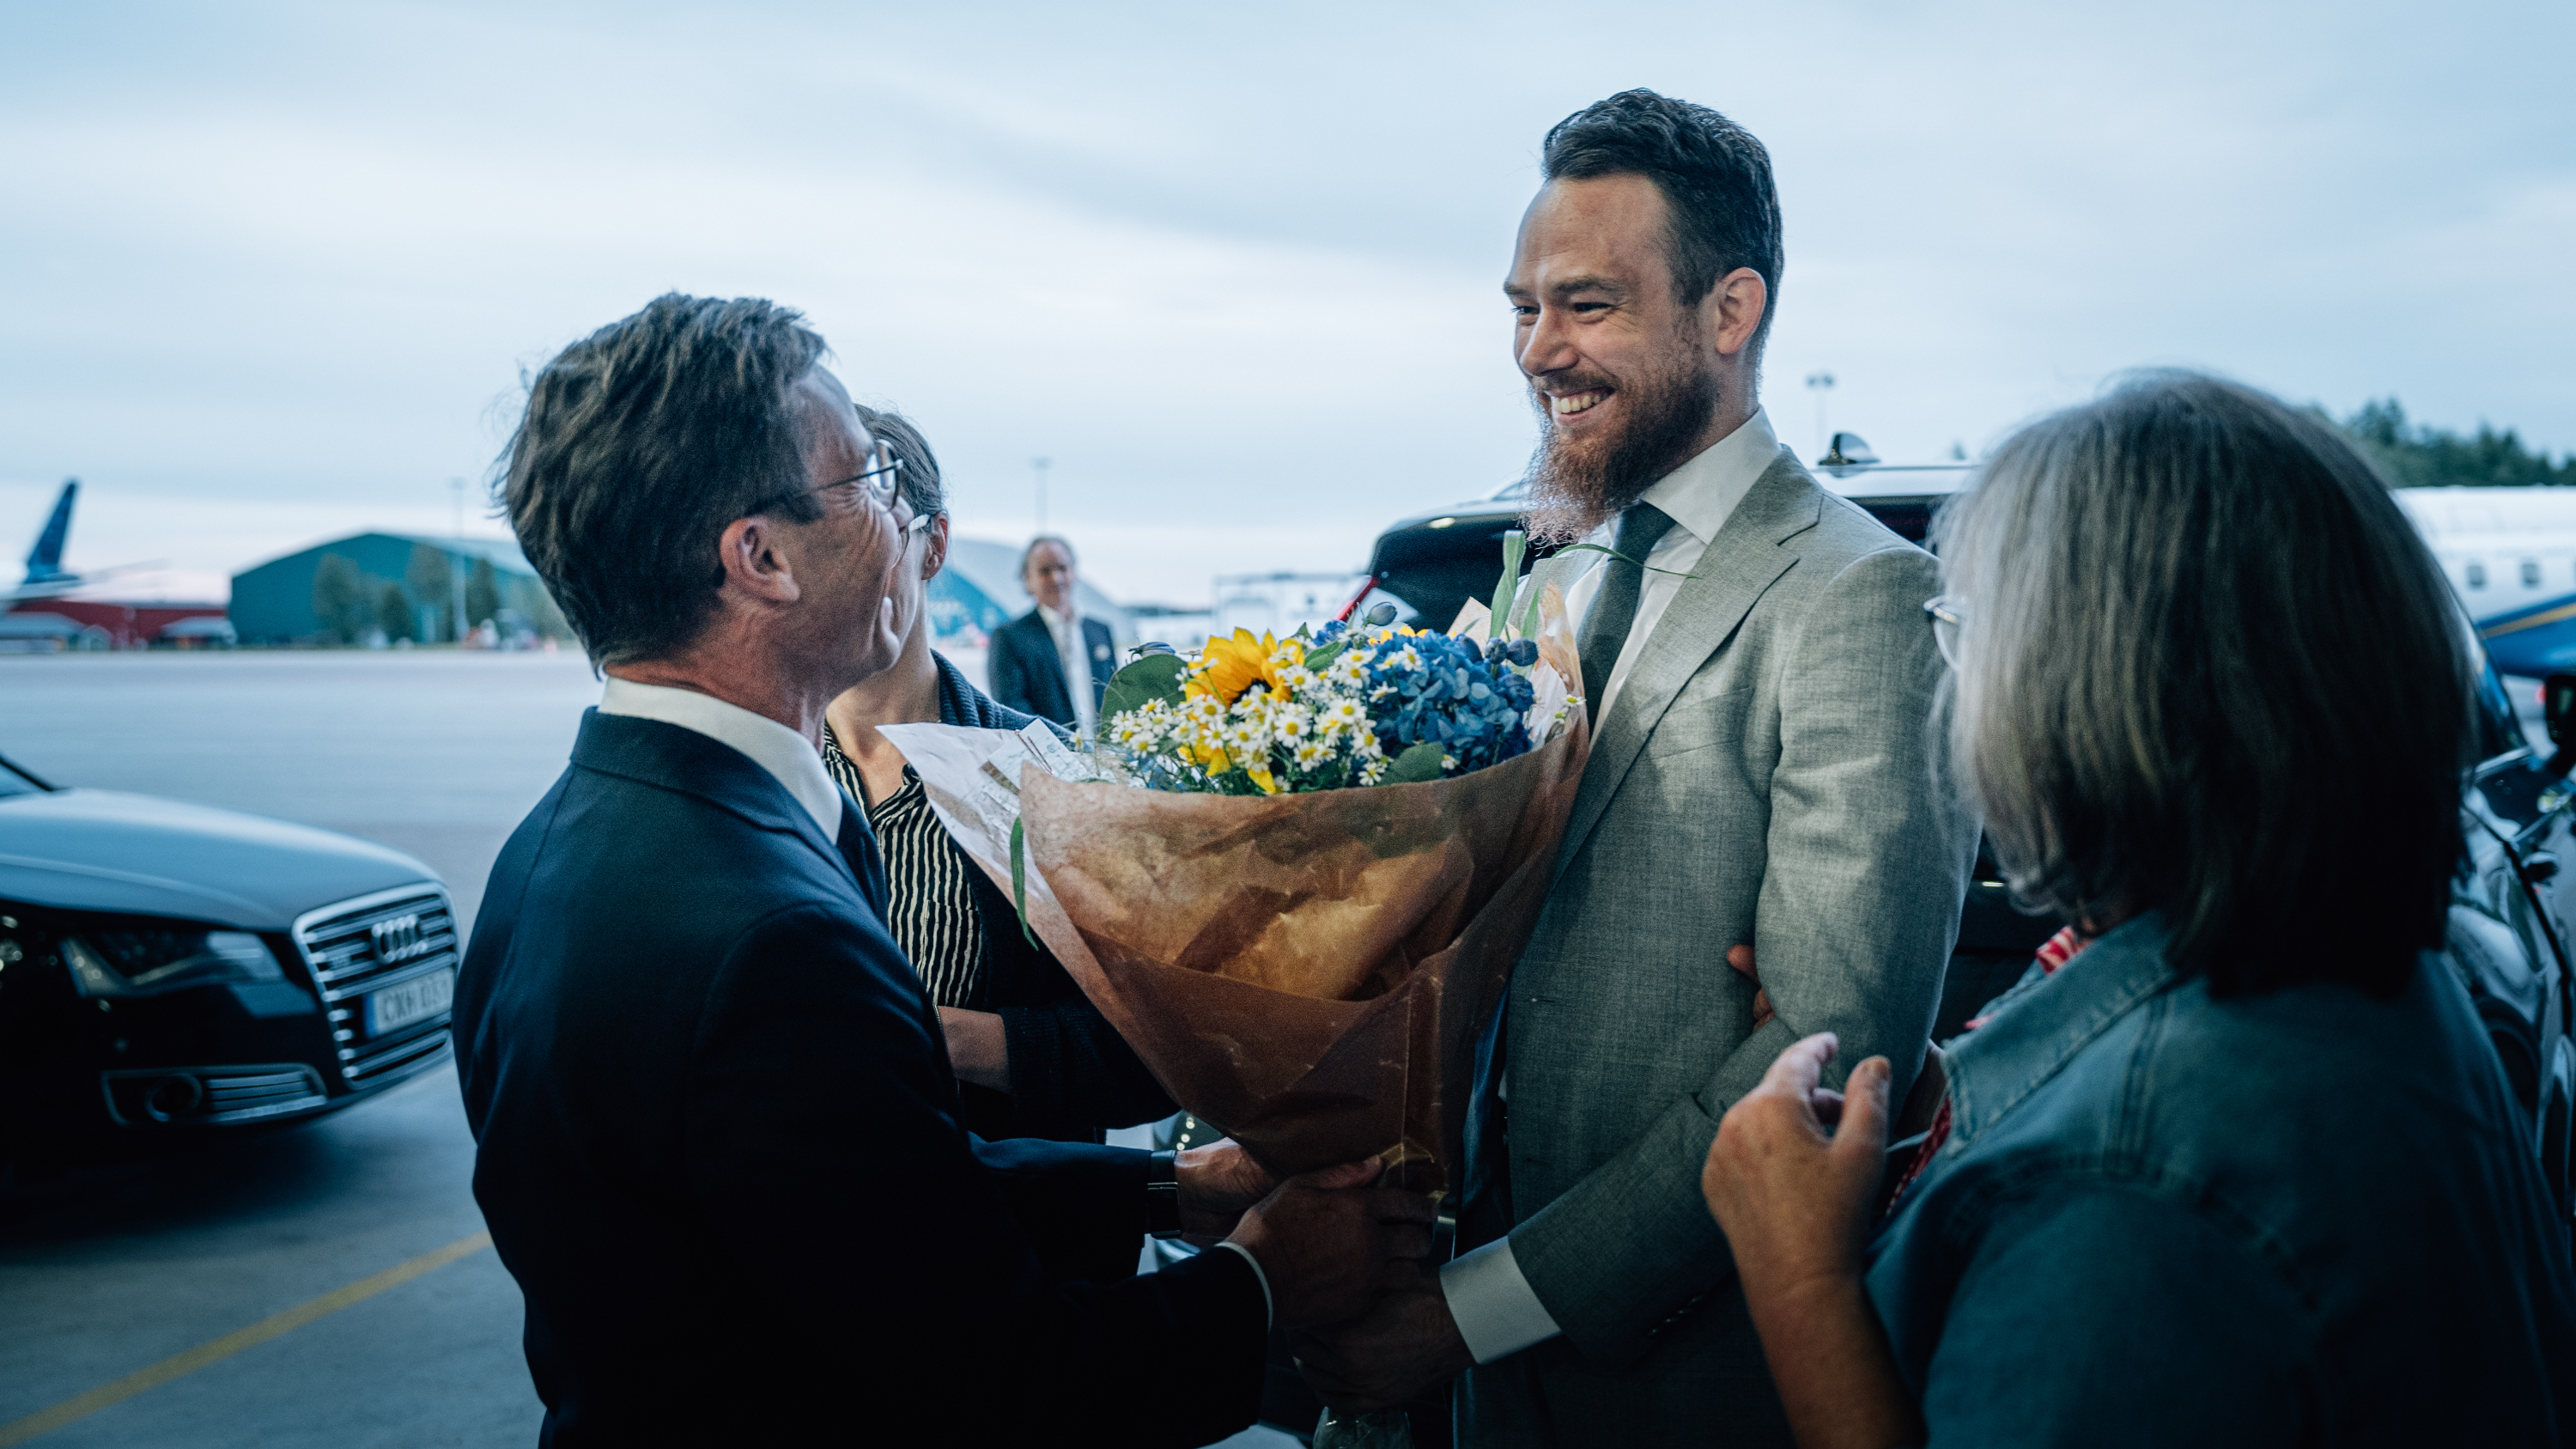 On 15 June, Johan Floderus returned home and was able to reunite with his family. In Arlanda, he was received by Prime Minister Ulf Kristersson.